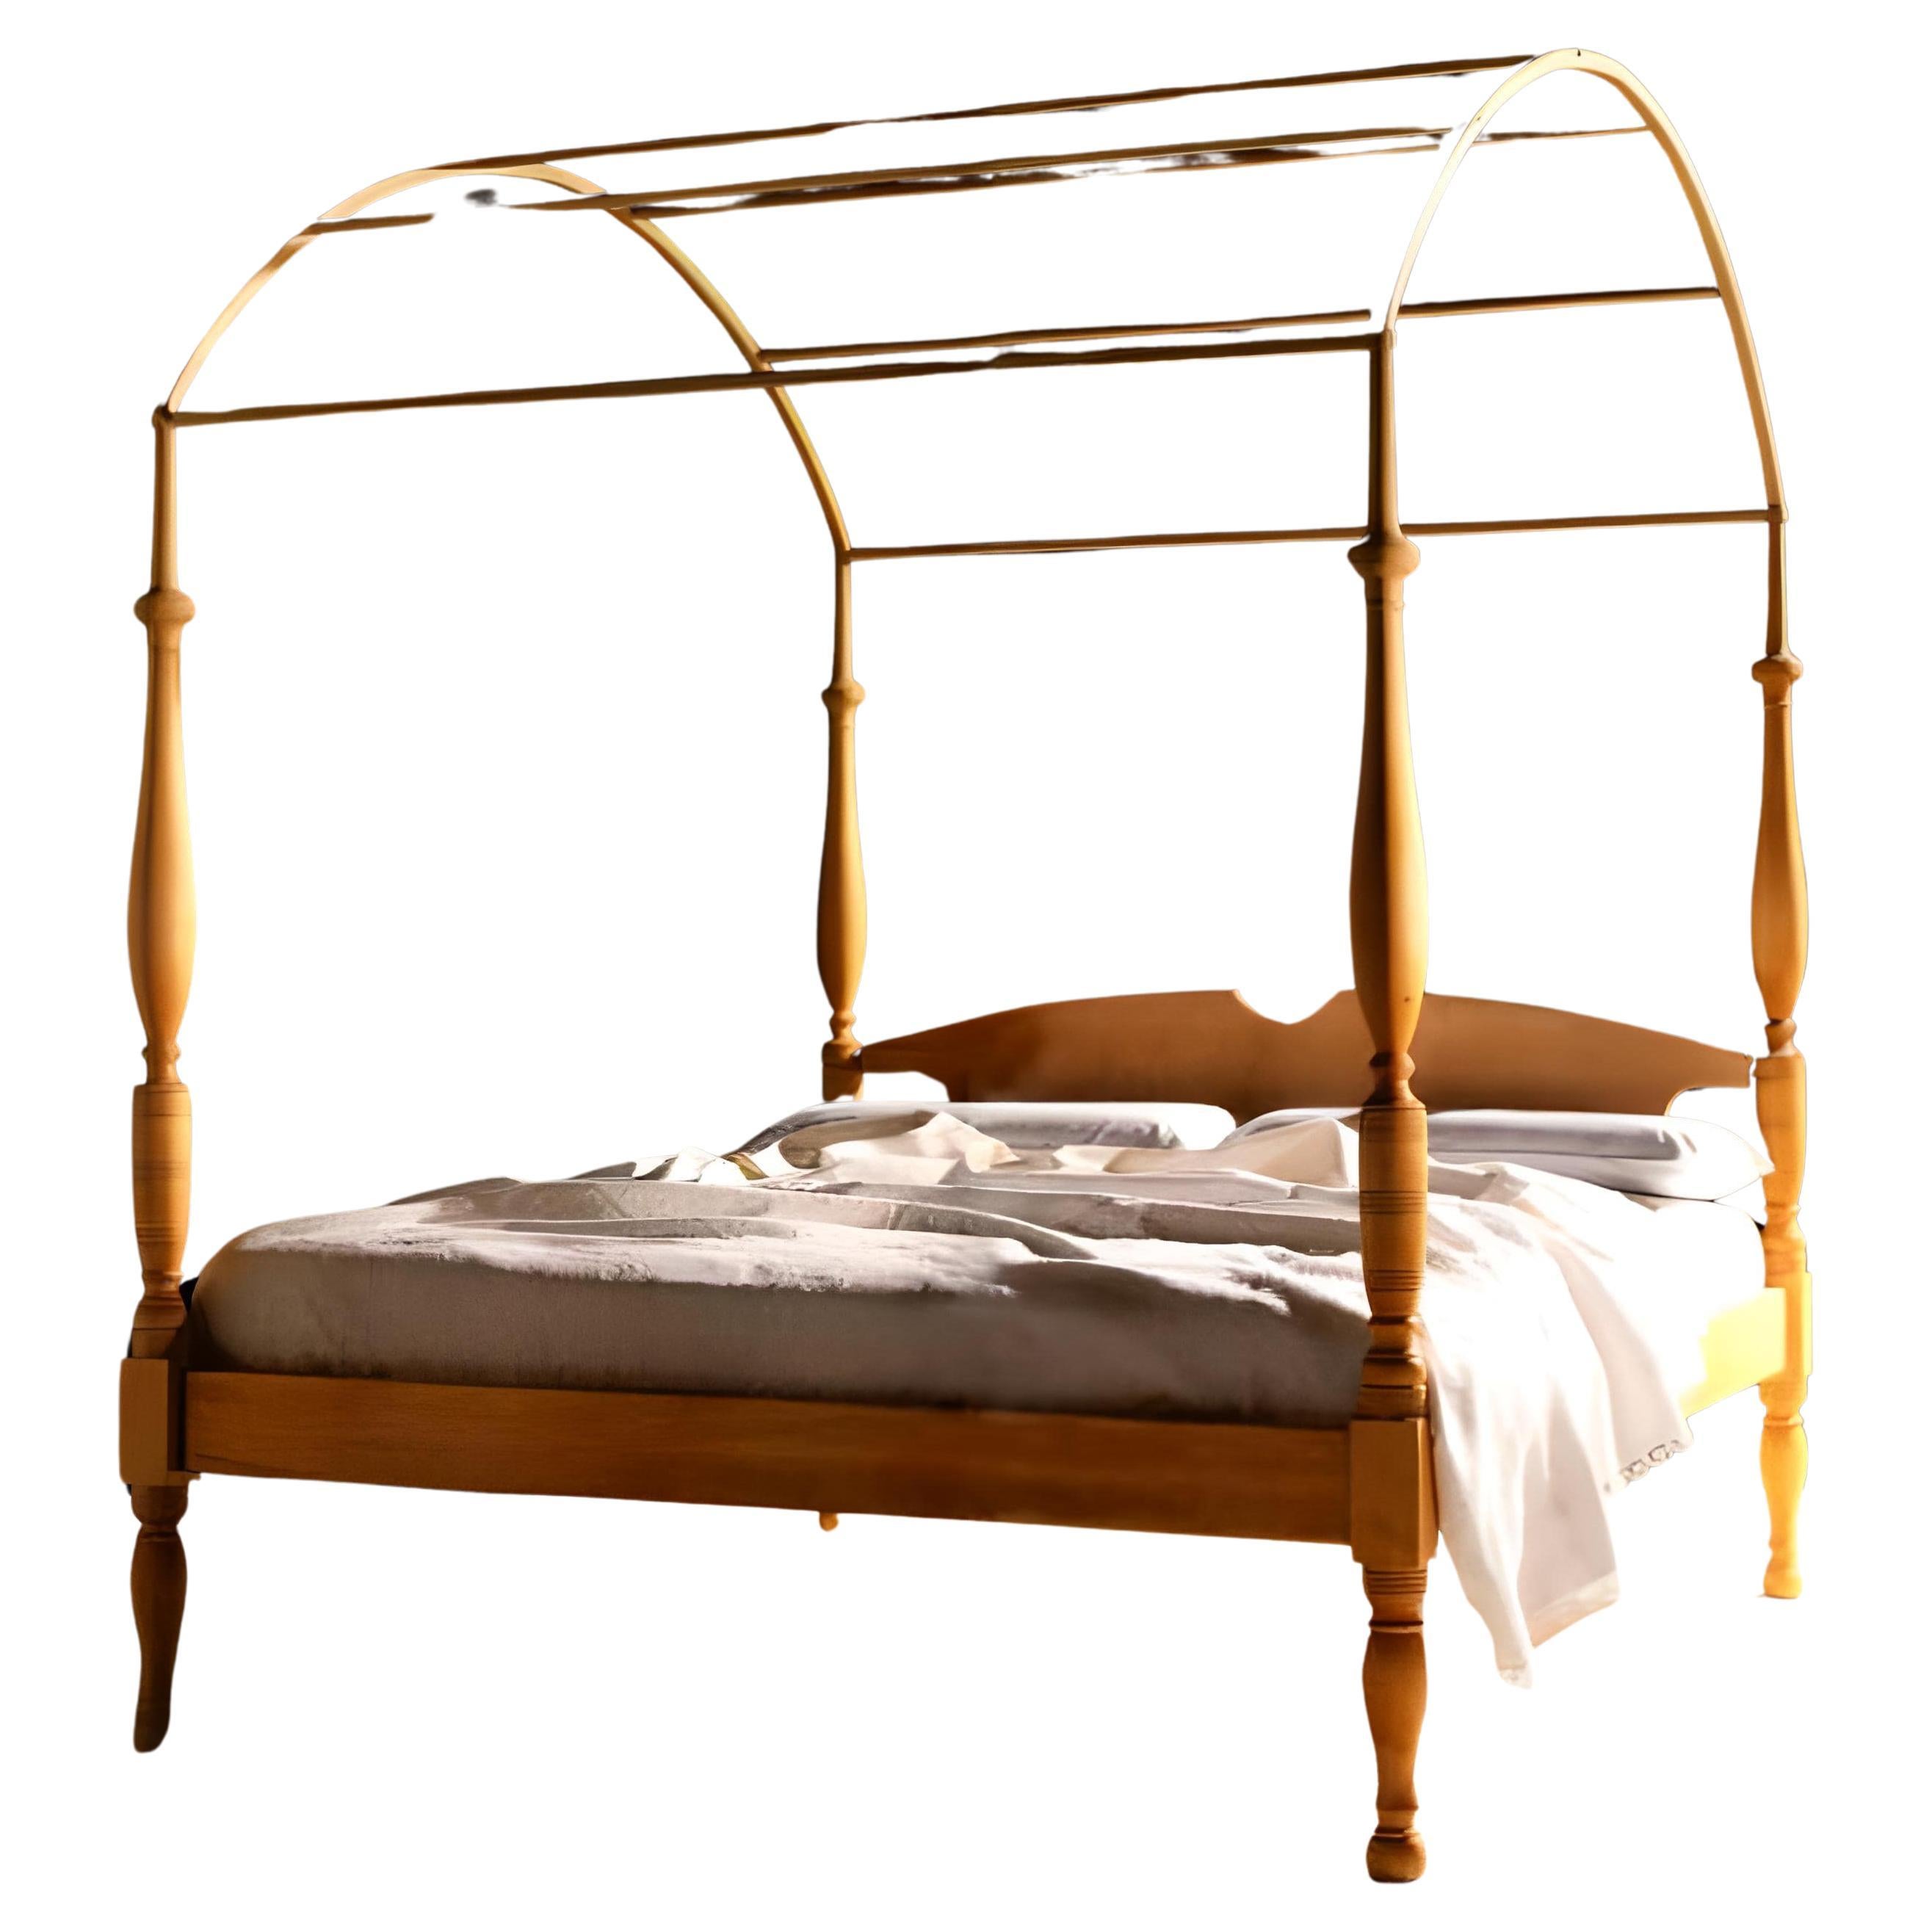 LINCOLN Four-polsted Bed - Solid Natural Maple wood with Turned Structure